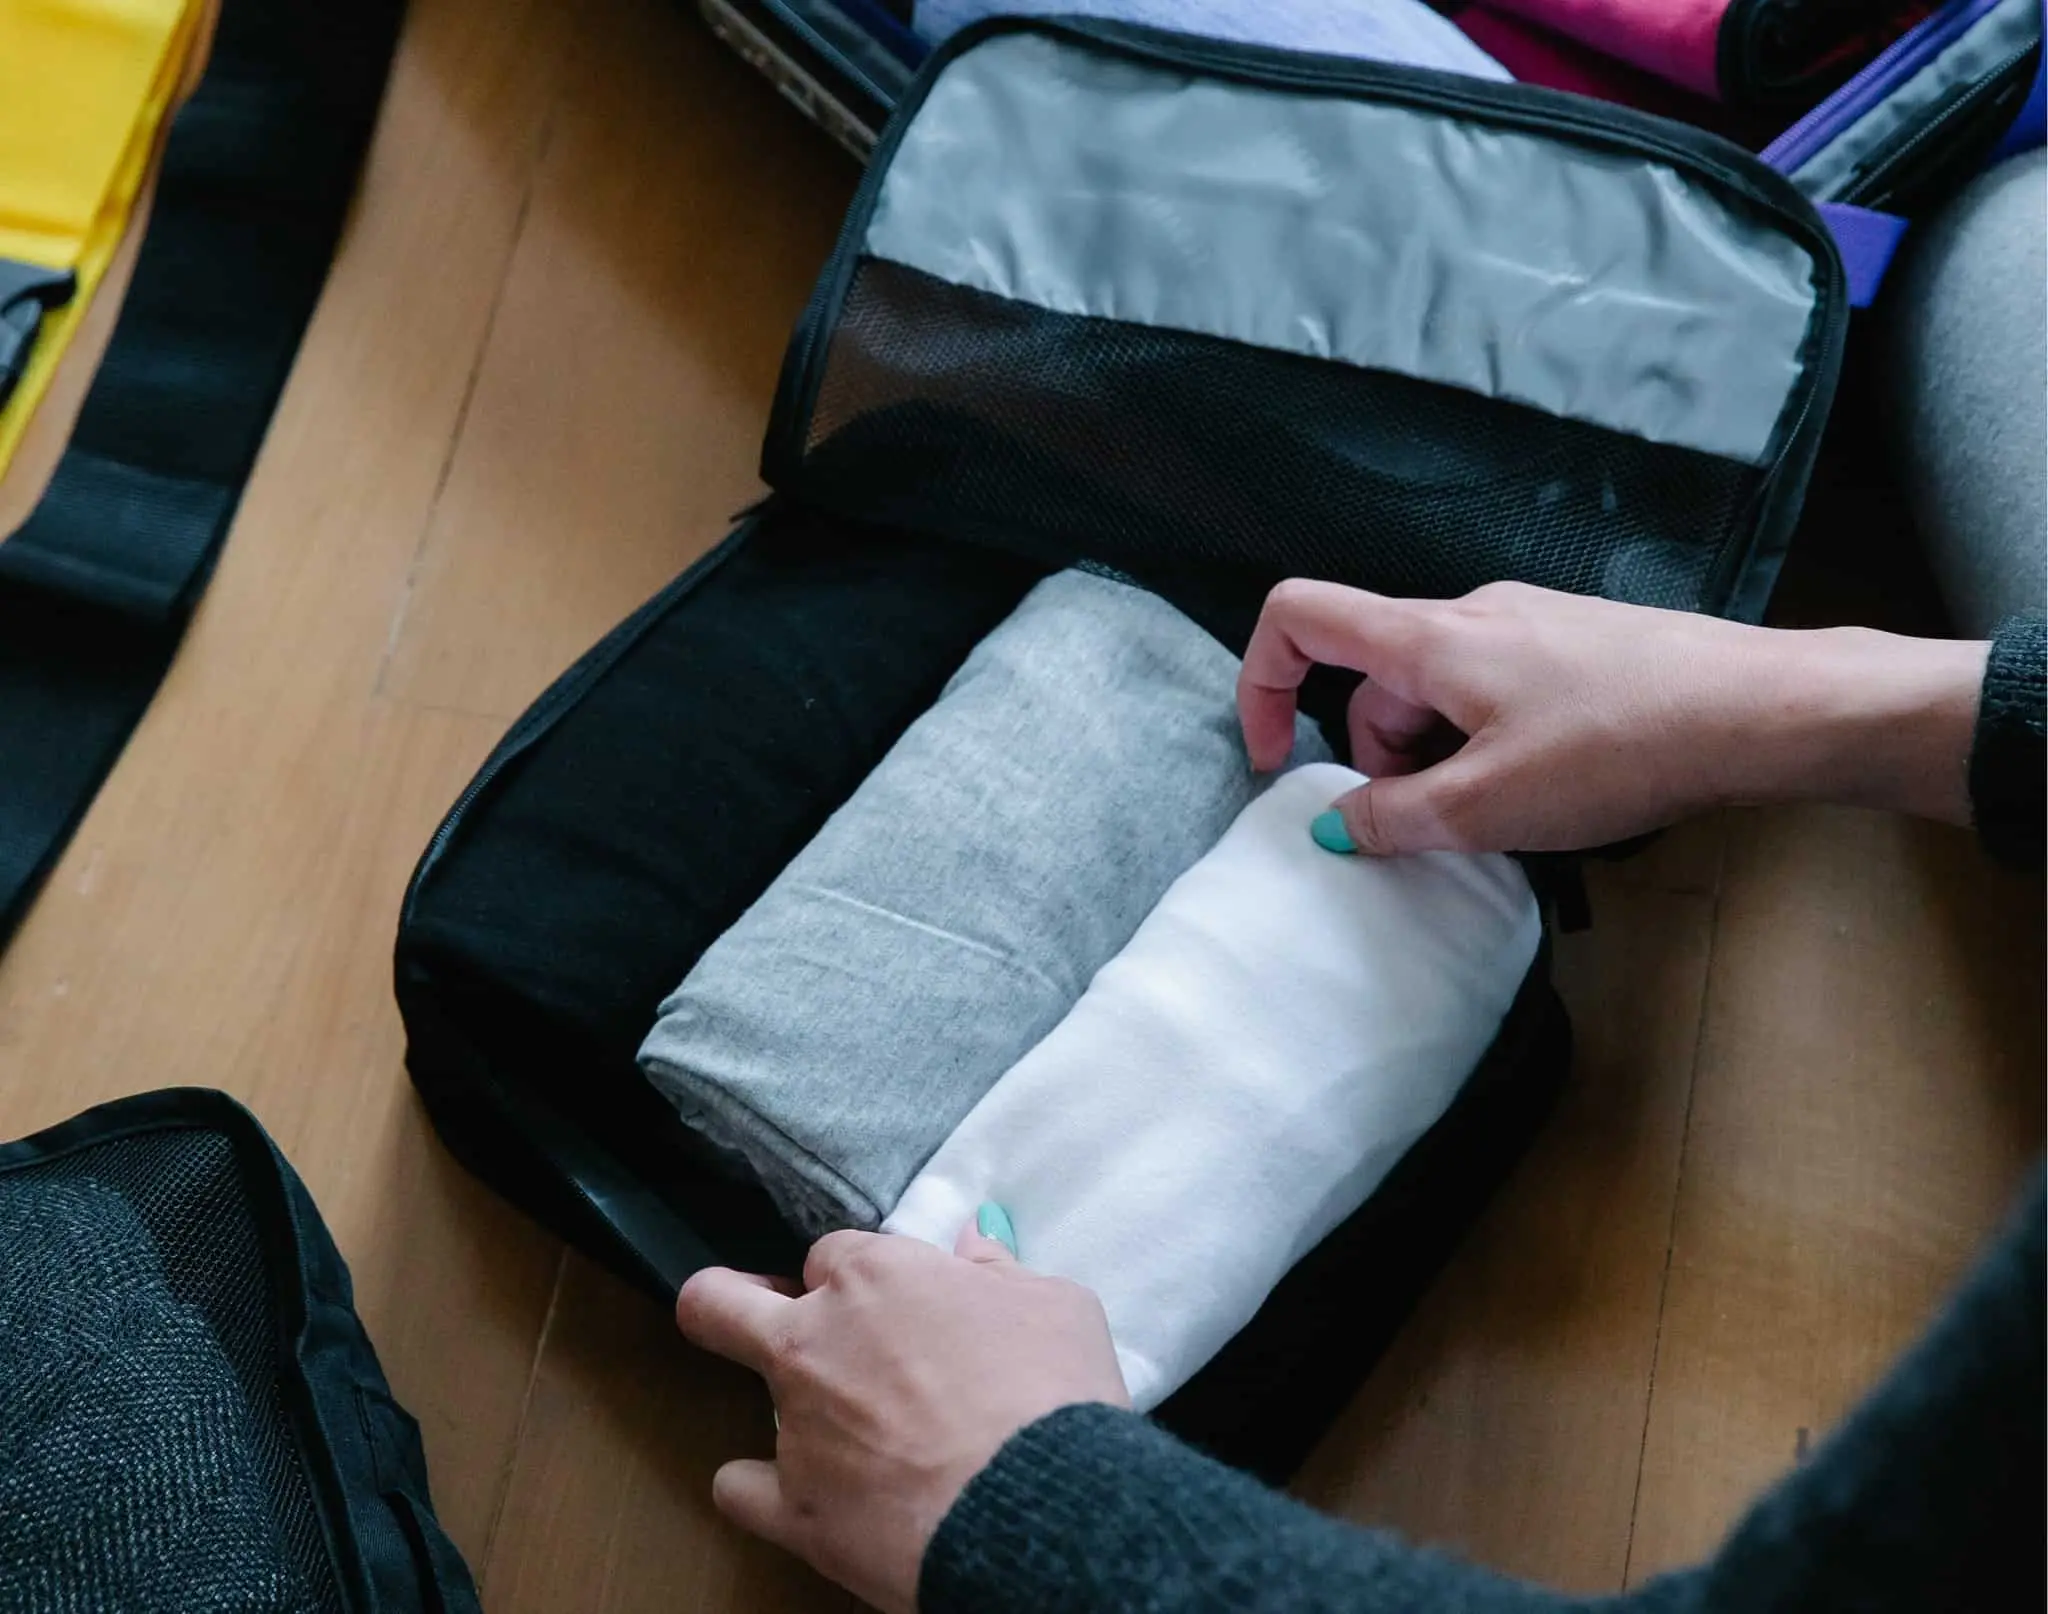 https://givinggetaway.com/wp-content/uploads/2023/06/Using-Packing-Cubes-Can-Simplify-Your-Travel-Organization-but-Its-Important-to-Consider-the-Ease-of-Use.webp